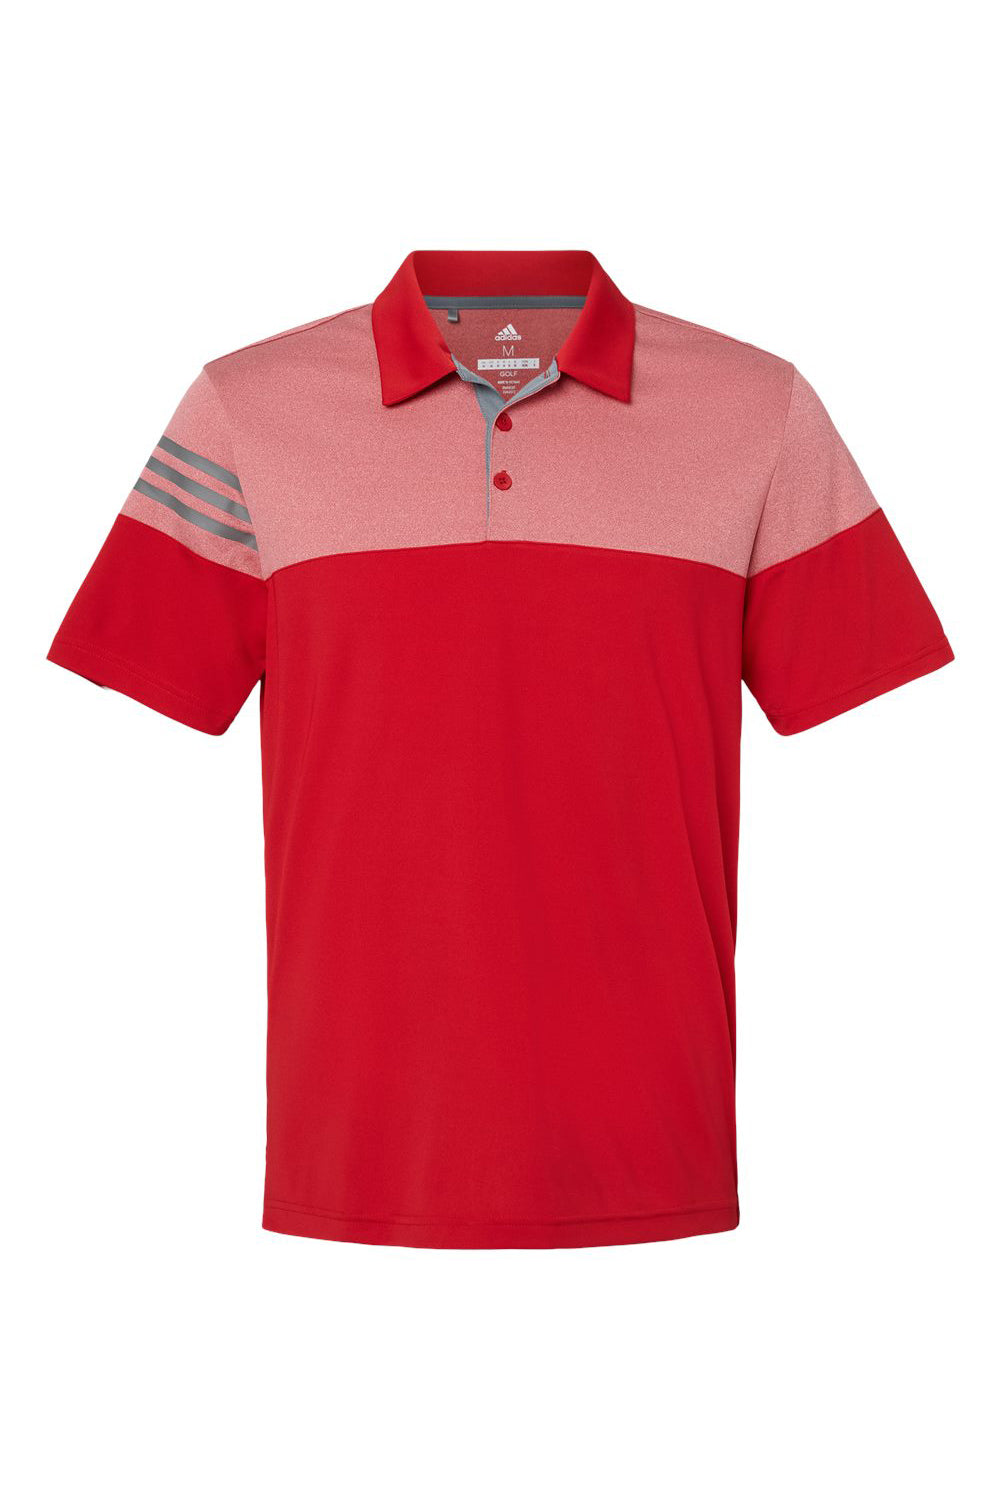 Adidas A213 Mens 3 Stripes Heathered Colorblock Short Sleeve Polo Shirt Power Red Flat Front